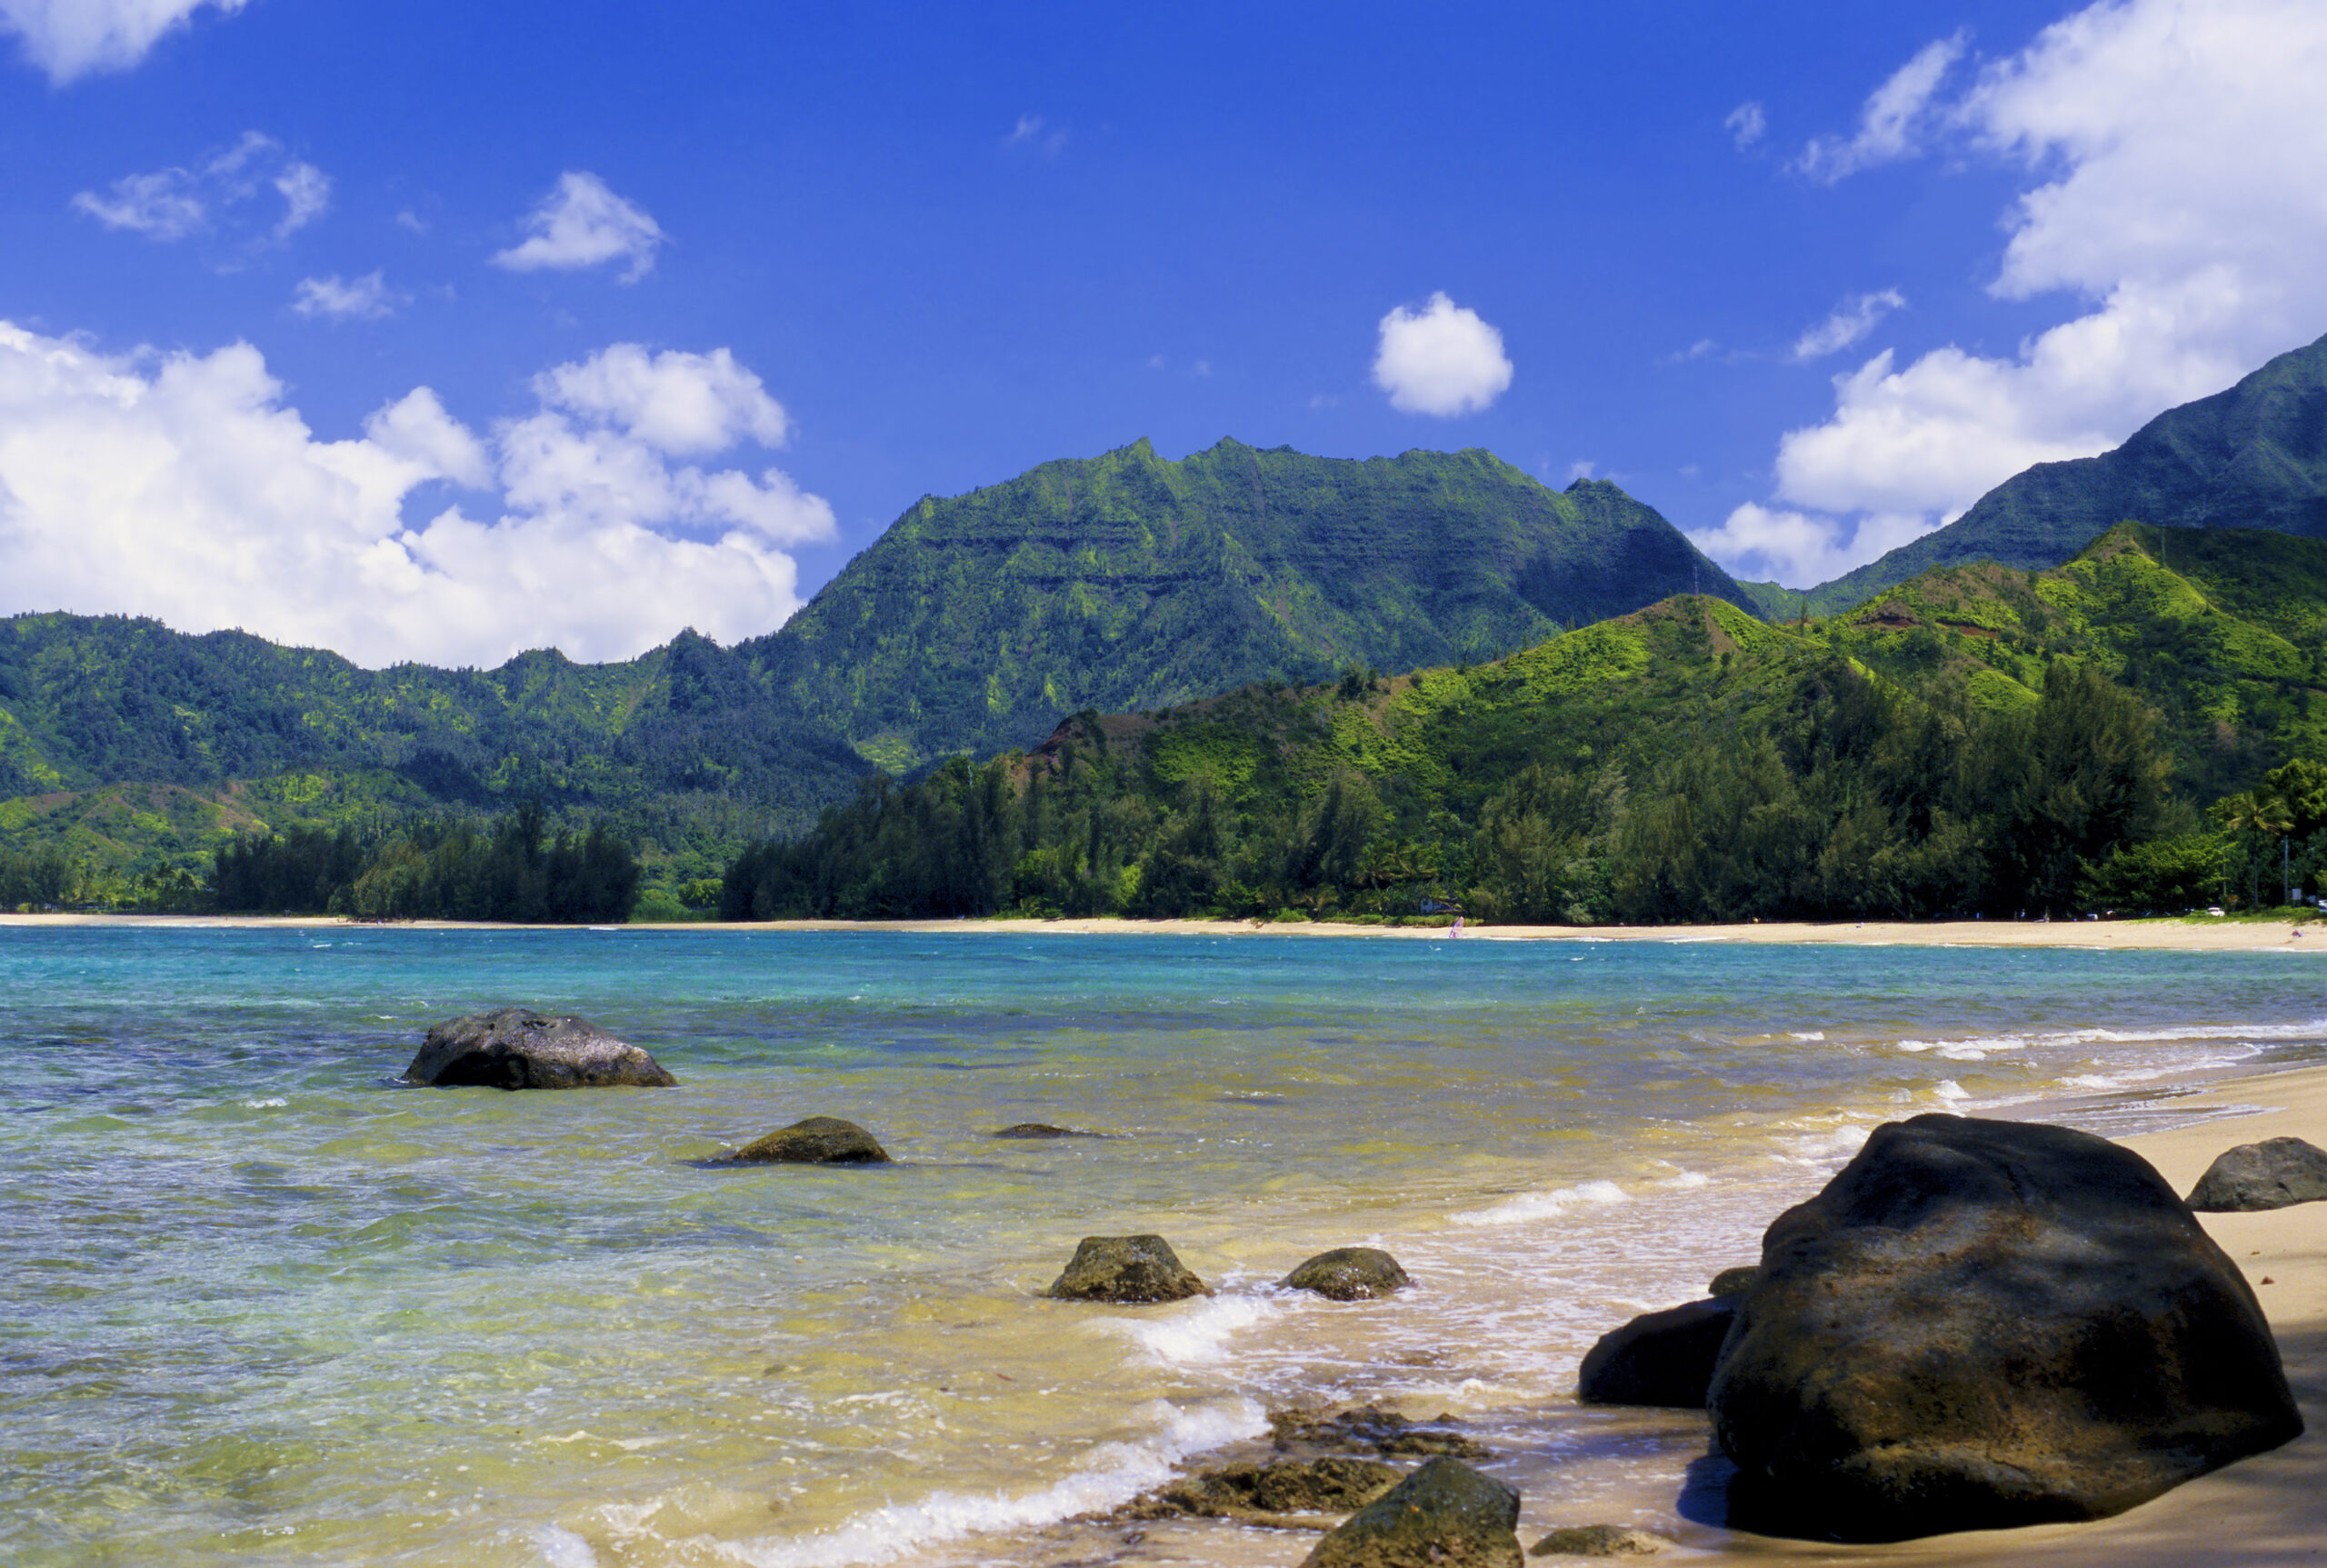 Things to Do and See in Kauai During Your Next Romantic Vacation - Hanalei Bay